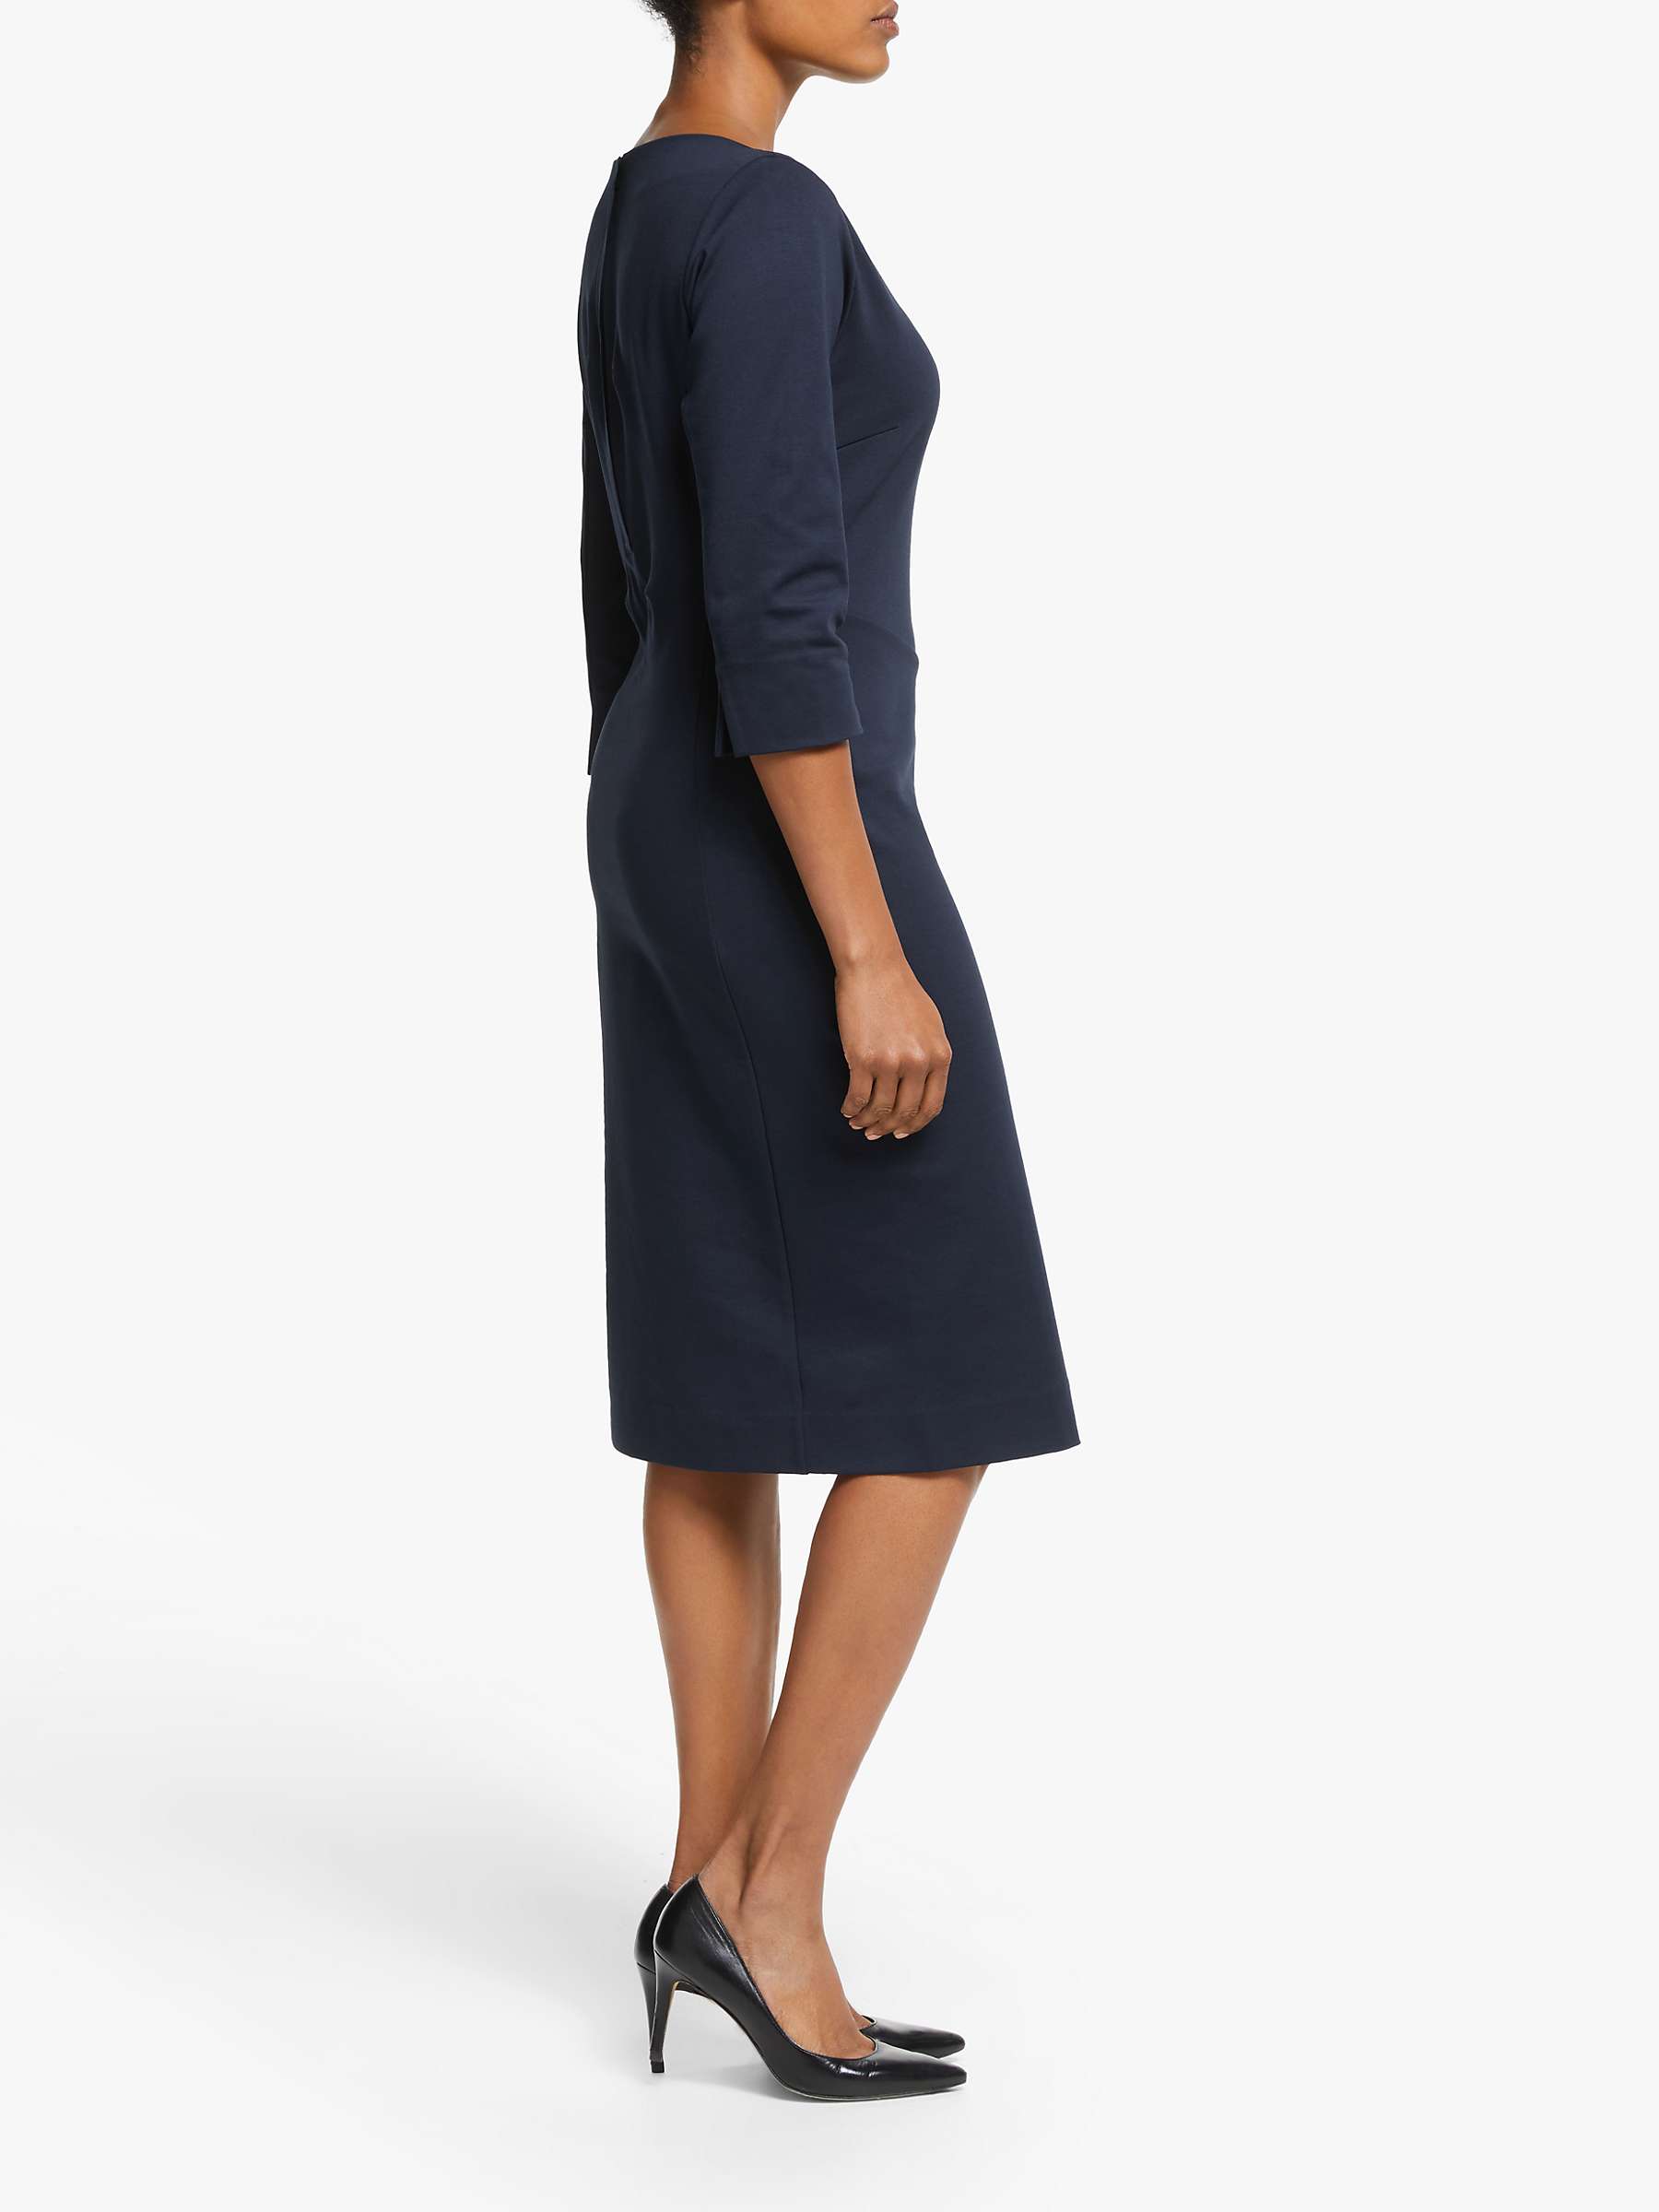 Buy Winser London Emily Miracle Dress Online at johnlewis.com